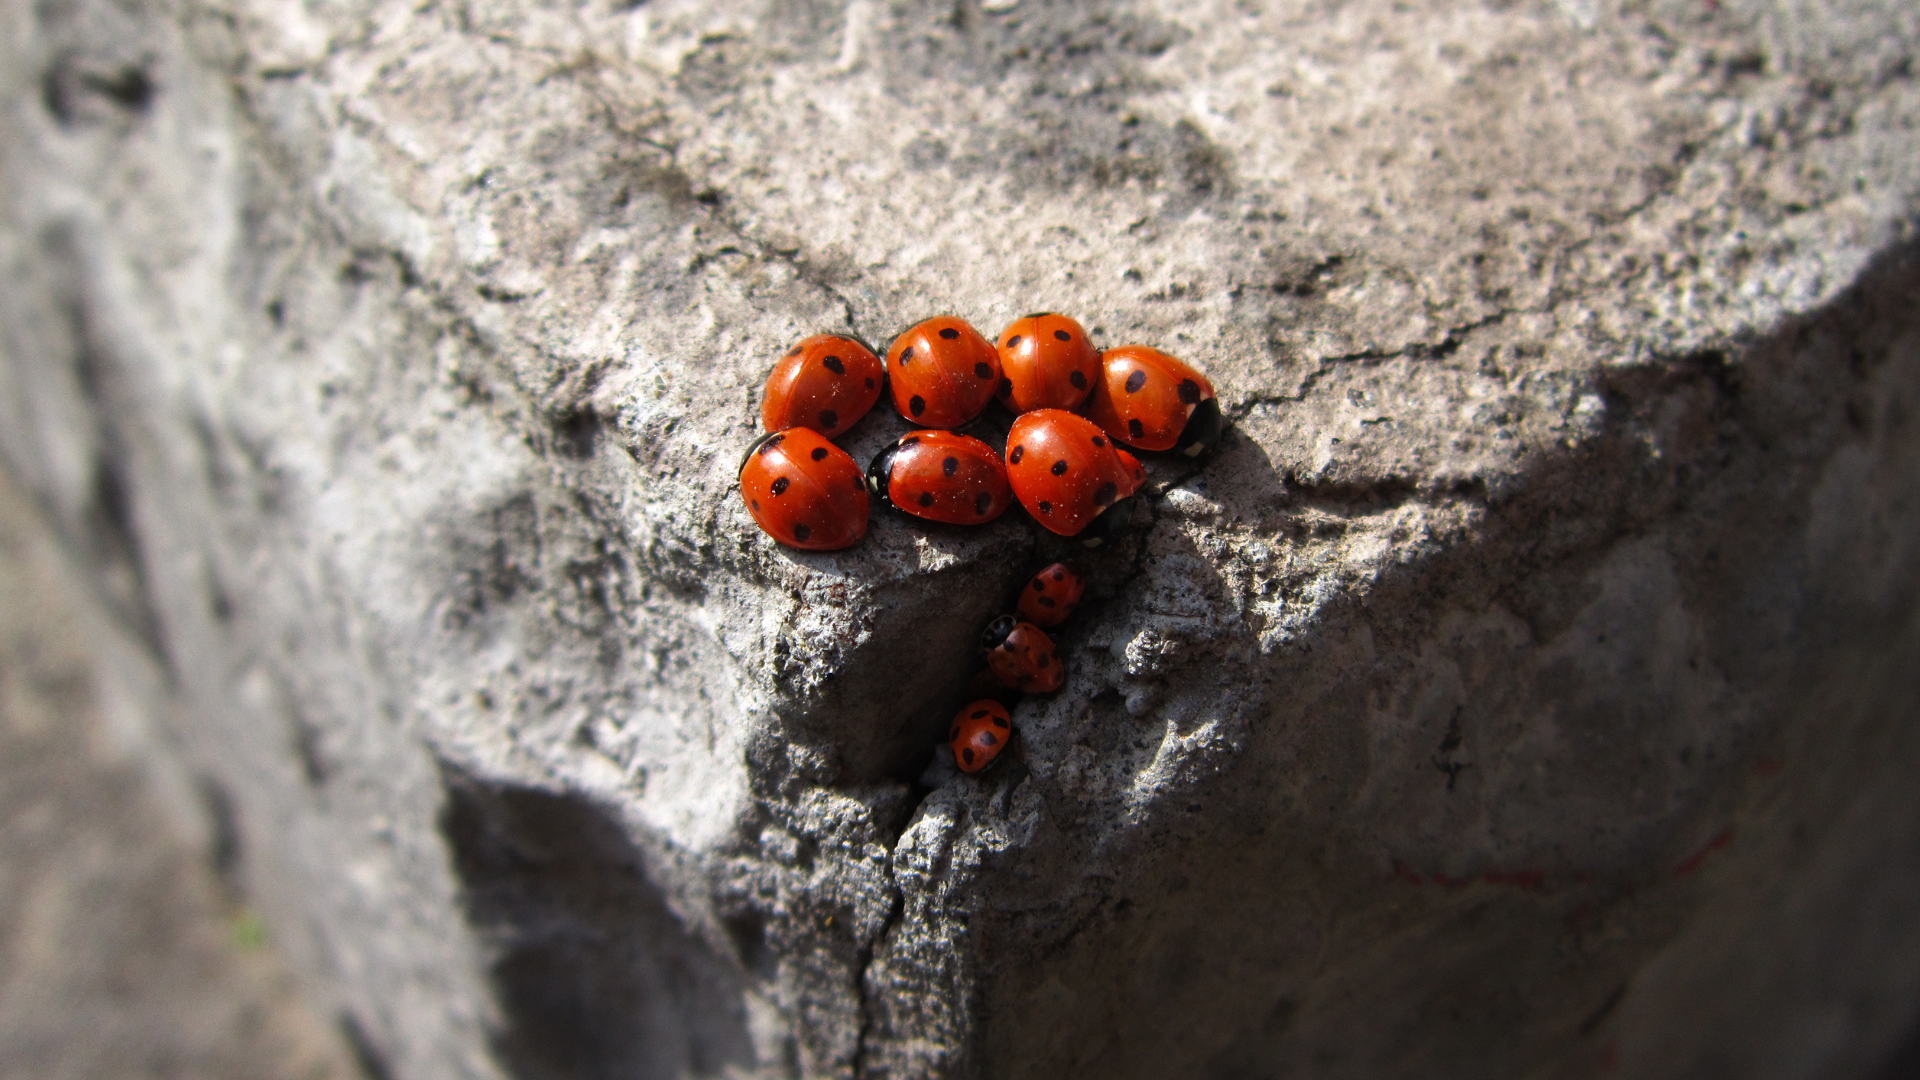 Ladybugs are known for their friendly and harmless nature